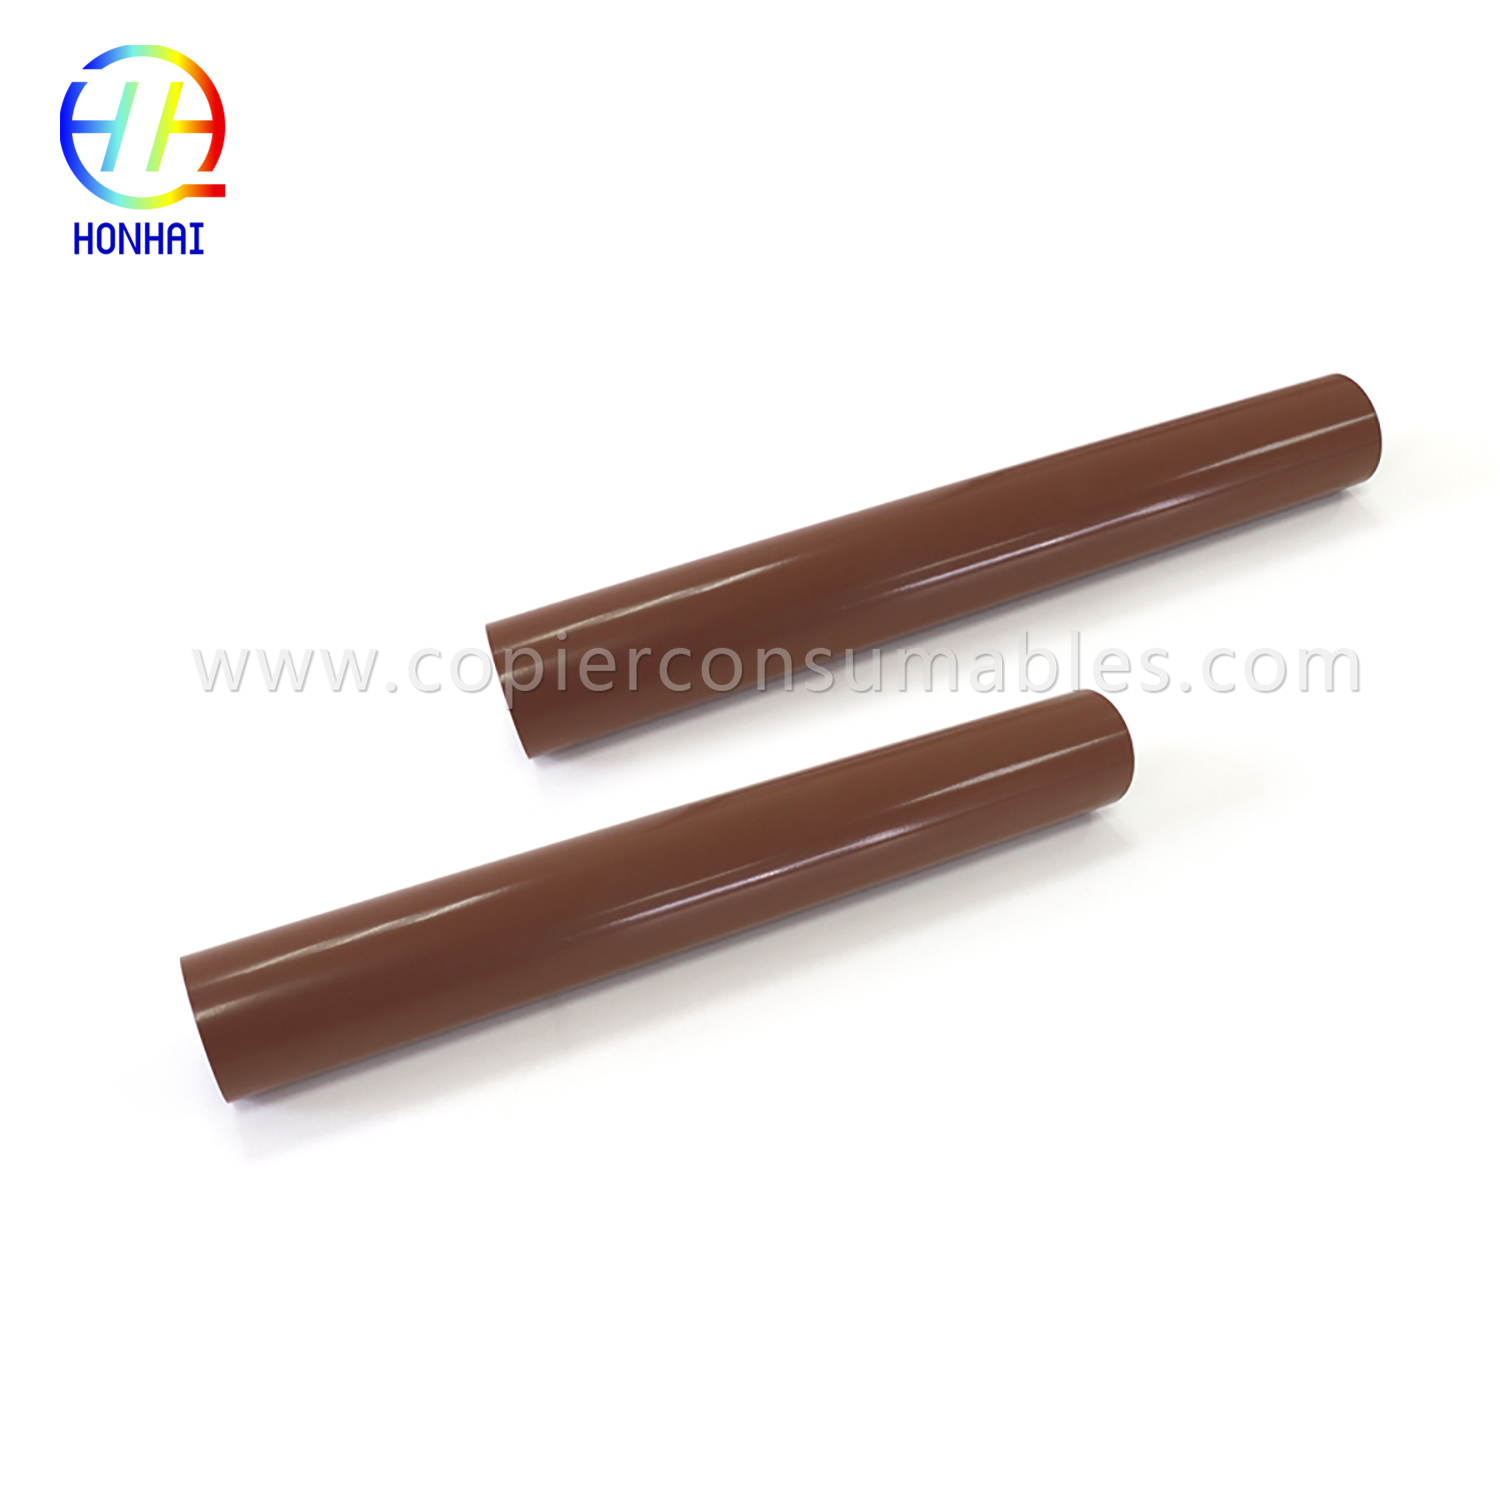 Fuser Film Sleeve Brother HL-5440 5445 5450 6180 MFC-8510 8520 8710 8810 8910 8950 DCP-8110 8150 8155 8250 (2) 拷贝